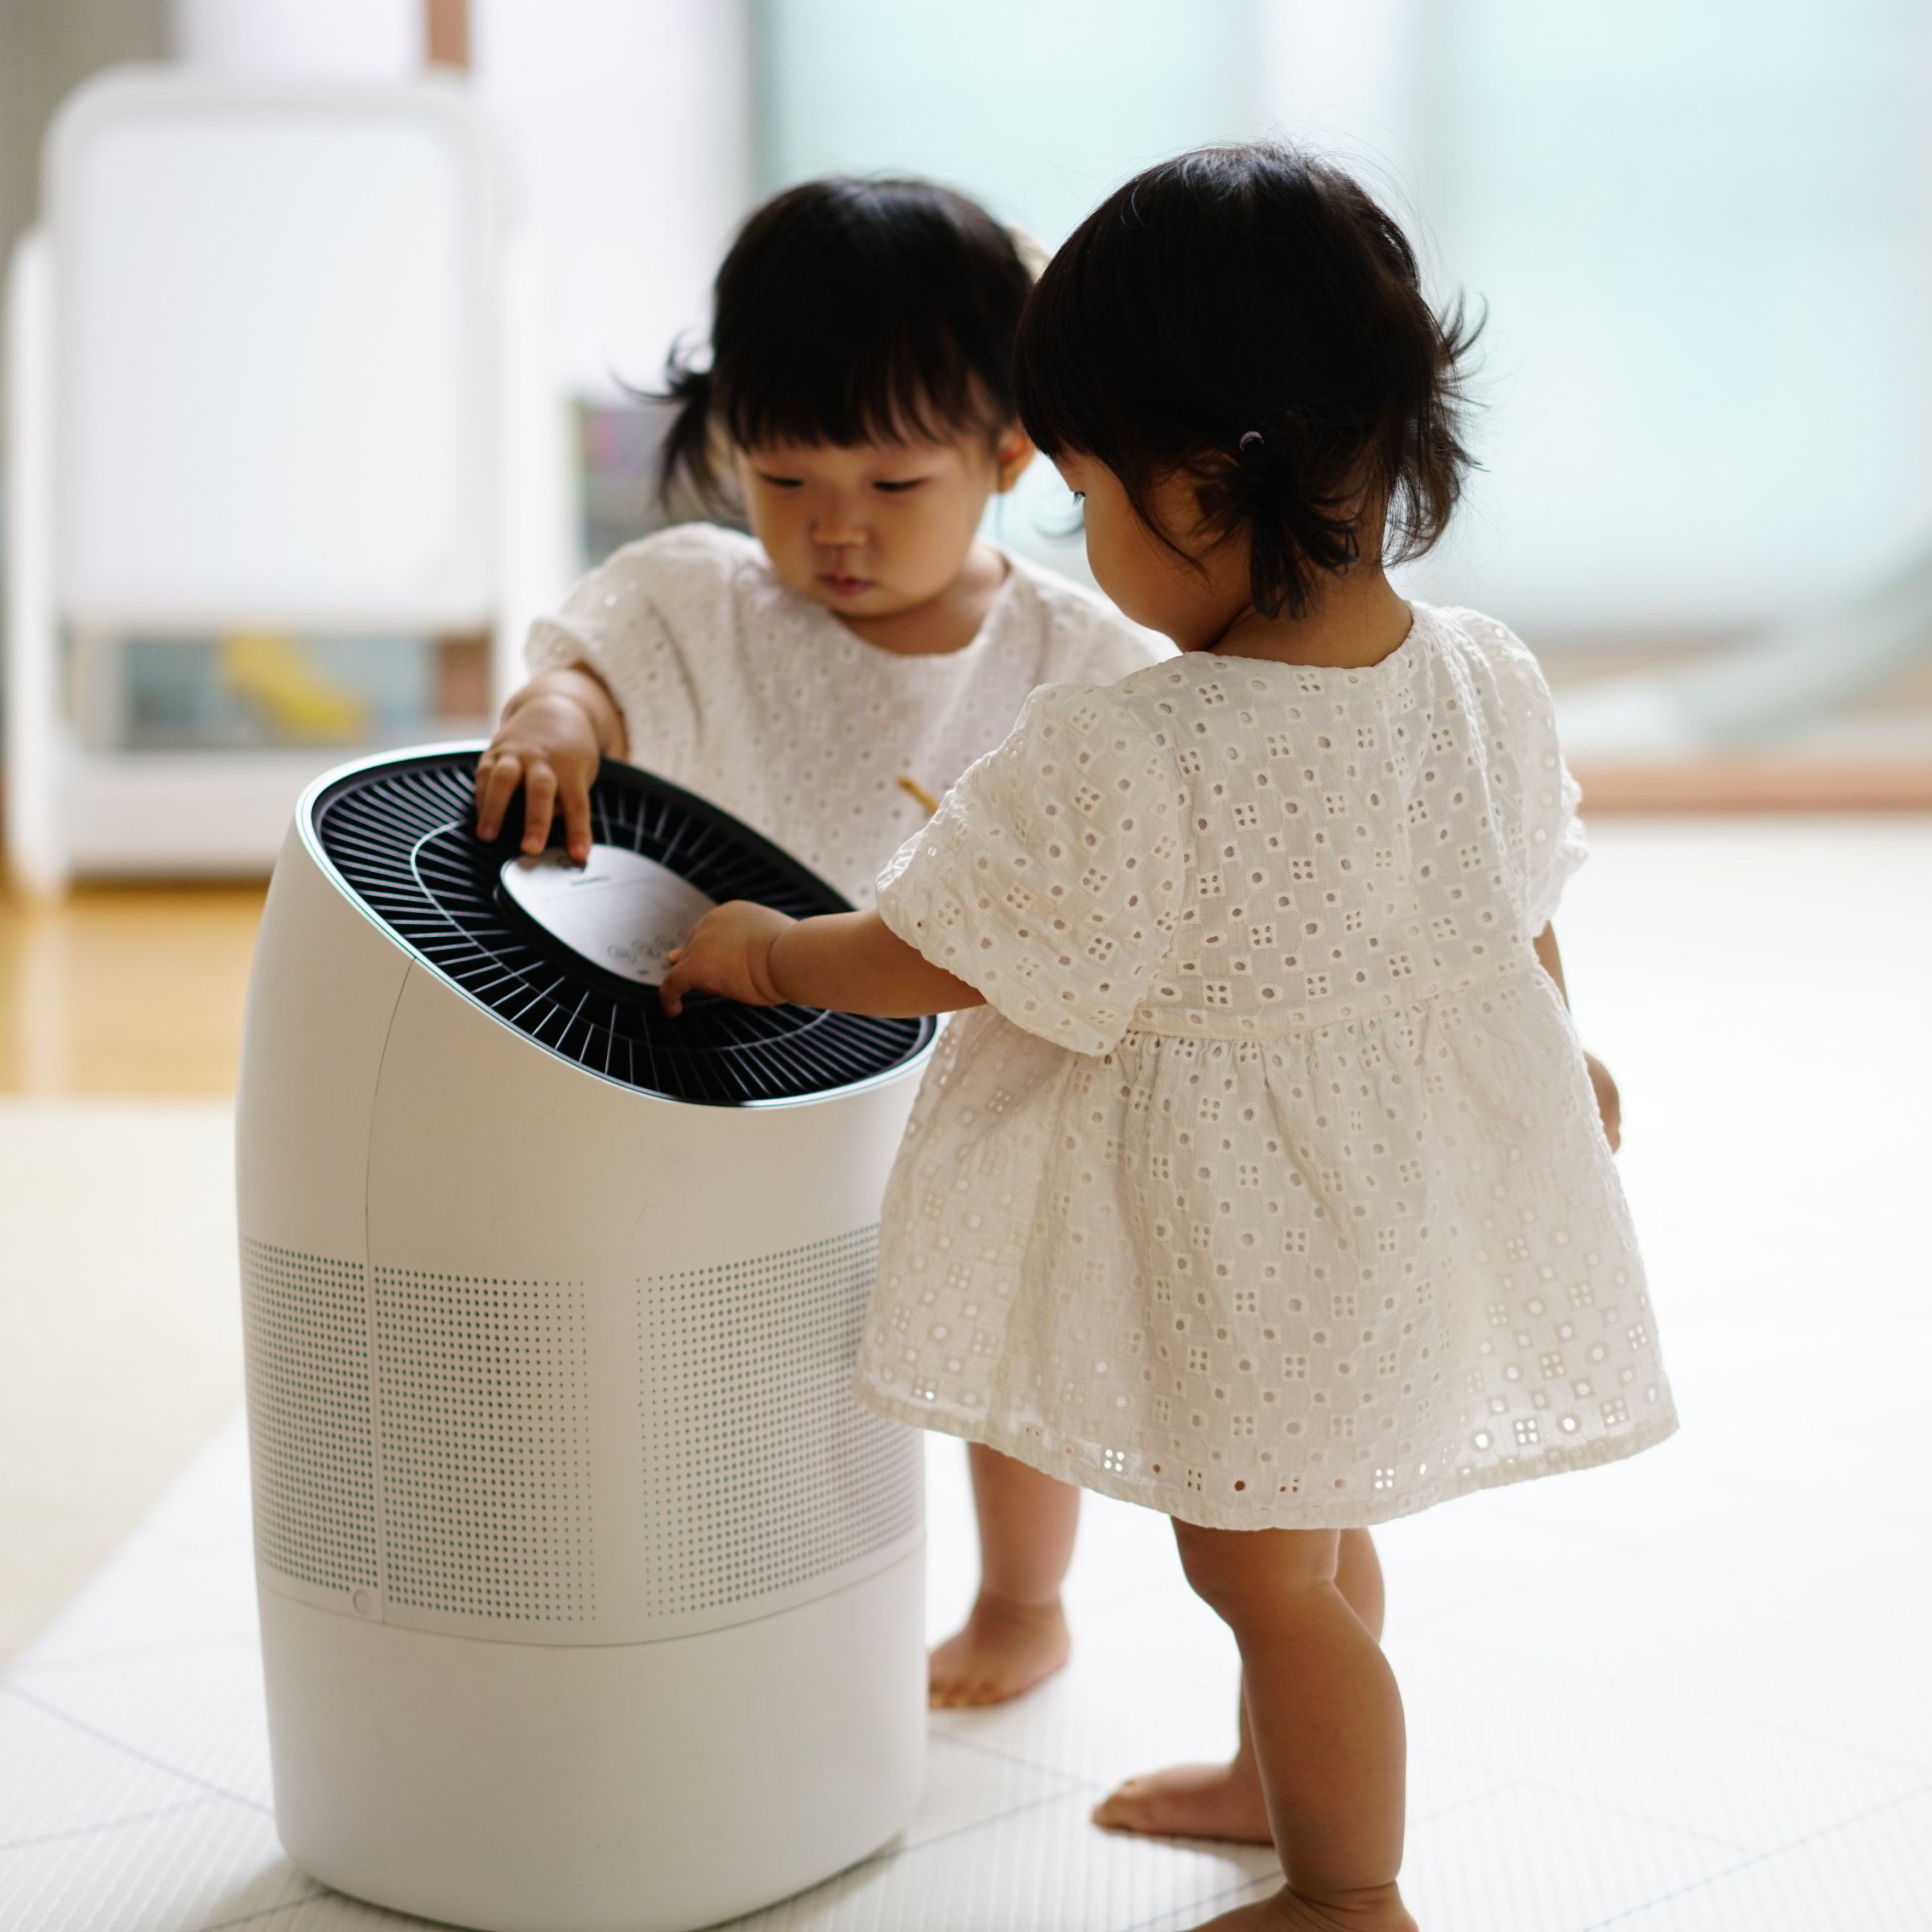 Two twin girl toddlers curiously touching Zenwell Super Air Purifier + Humidifier Smart touch display